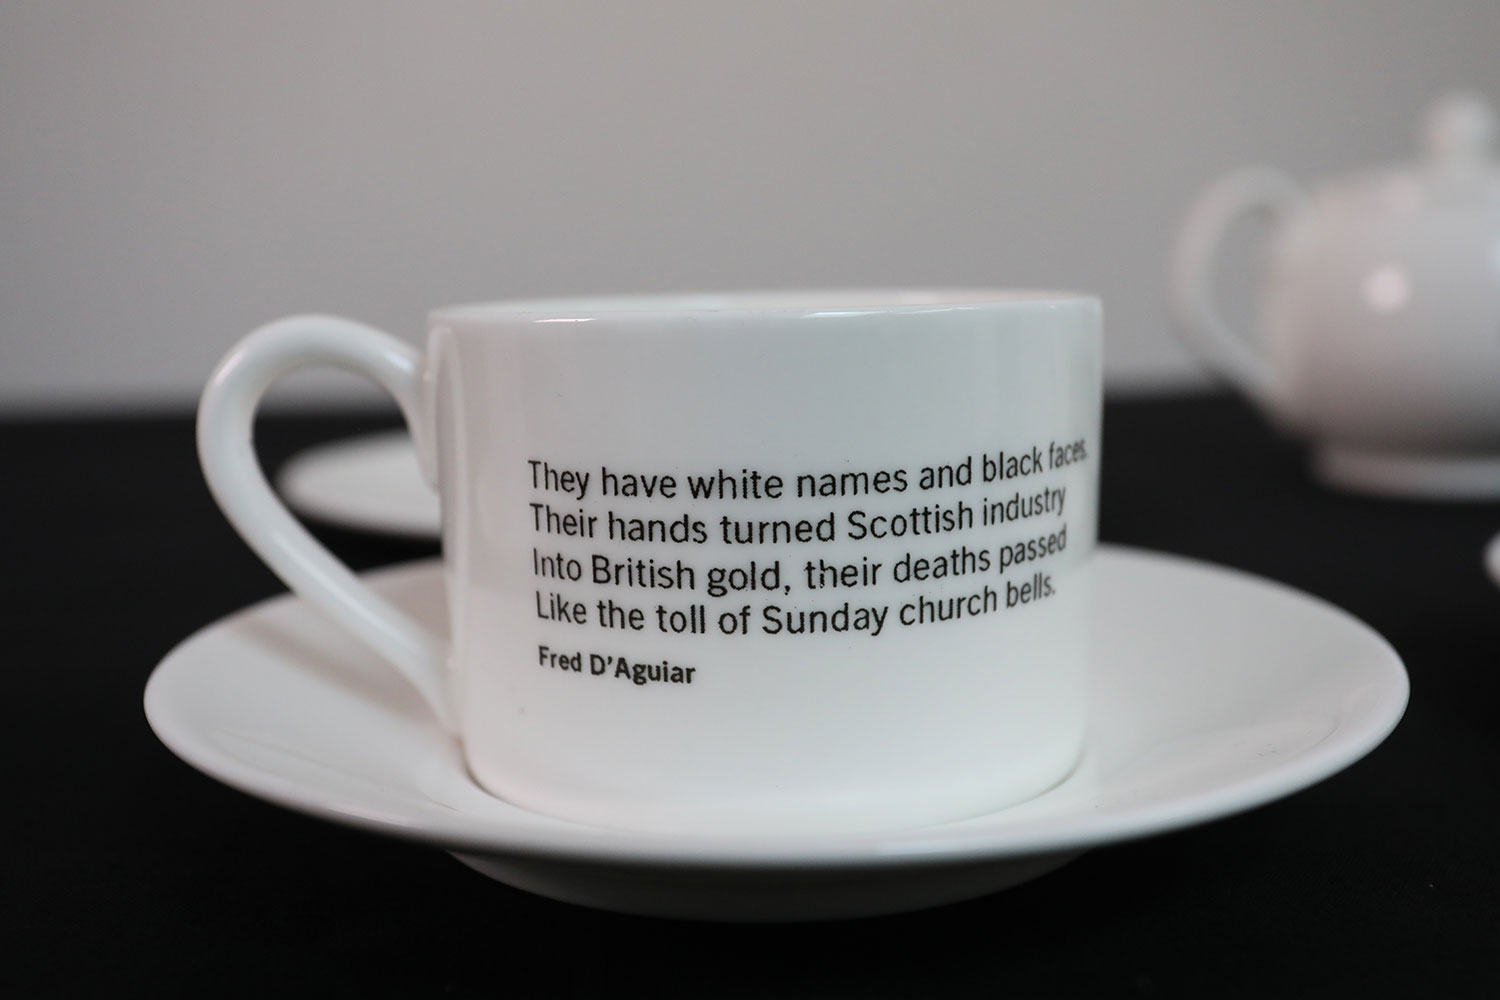 Porcelain teacup with poetry extract, from The Empire Café. At the pop up café in Glasgow, during the Commonwealth Games in 2014, visitors discussed new understandings of Scotland’s slavery past over the products of empire. National Museums Scotland, X.2017.89.4.